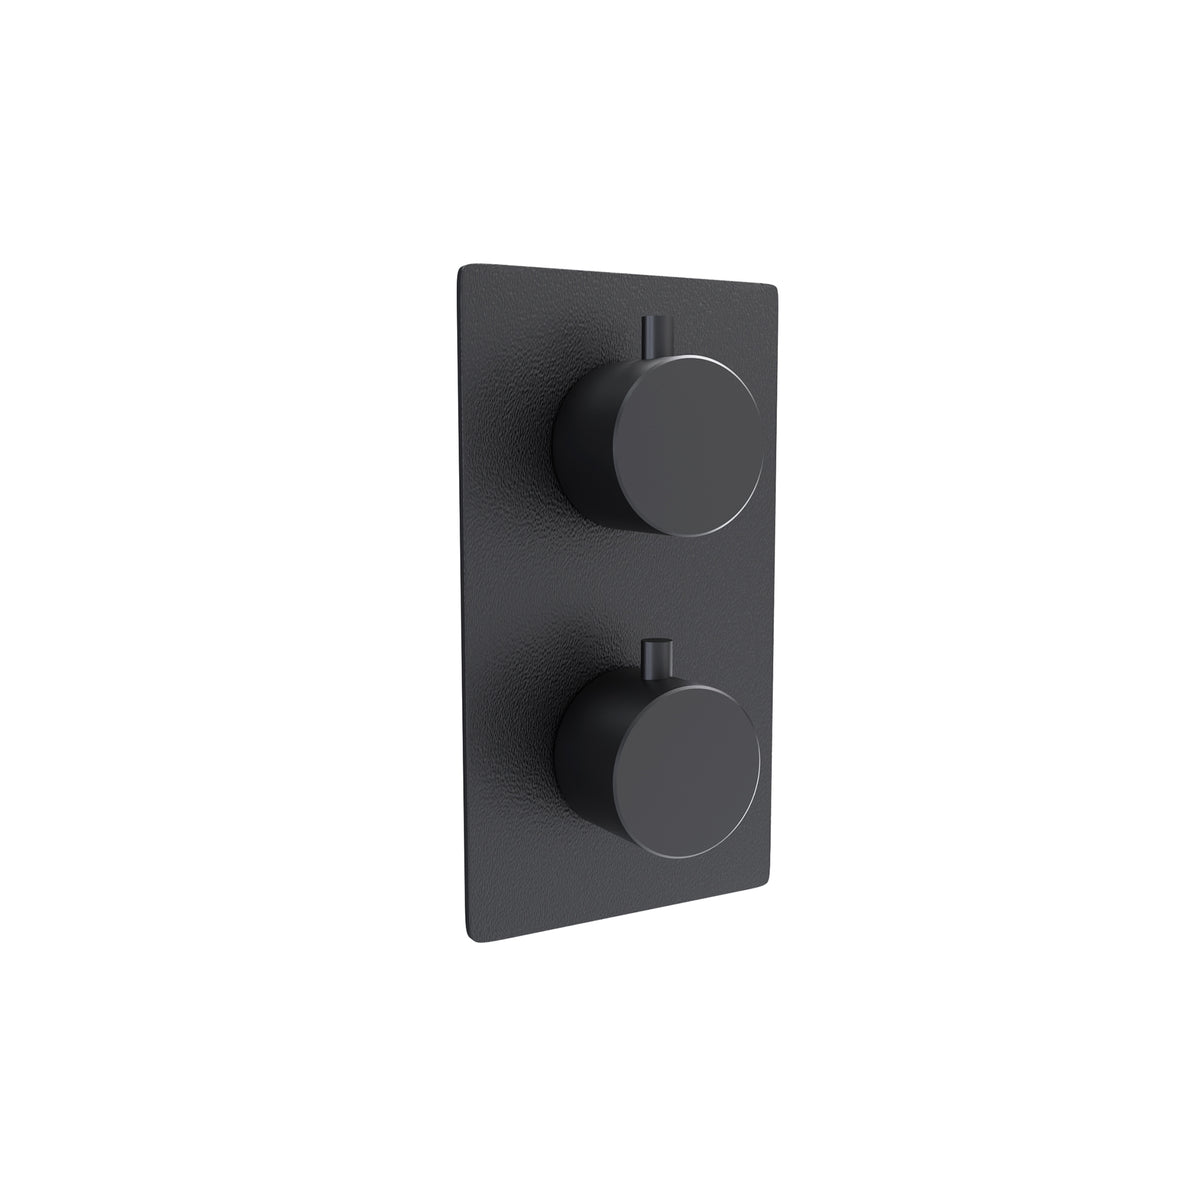 Sorentto Wall Mounted Termostatic Shower Mixer in Black